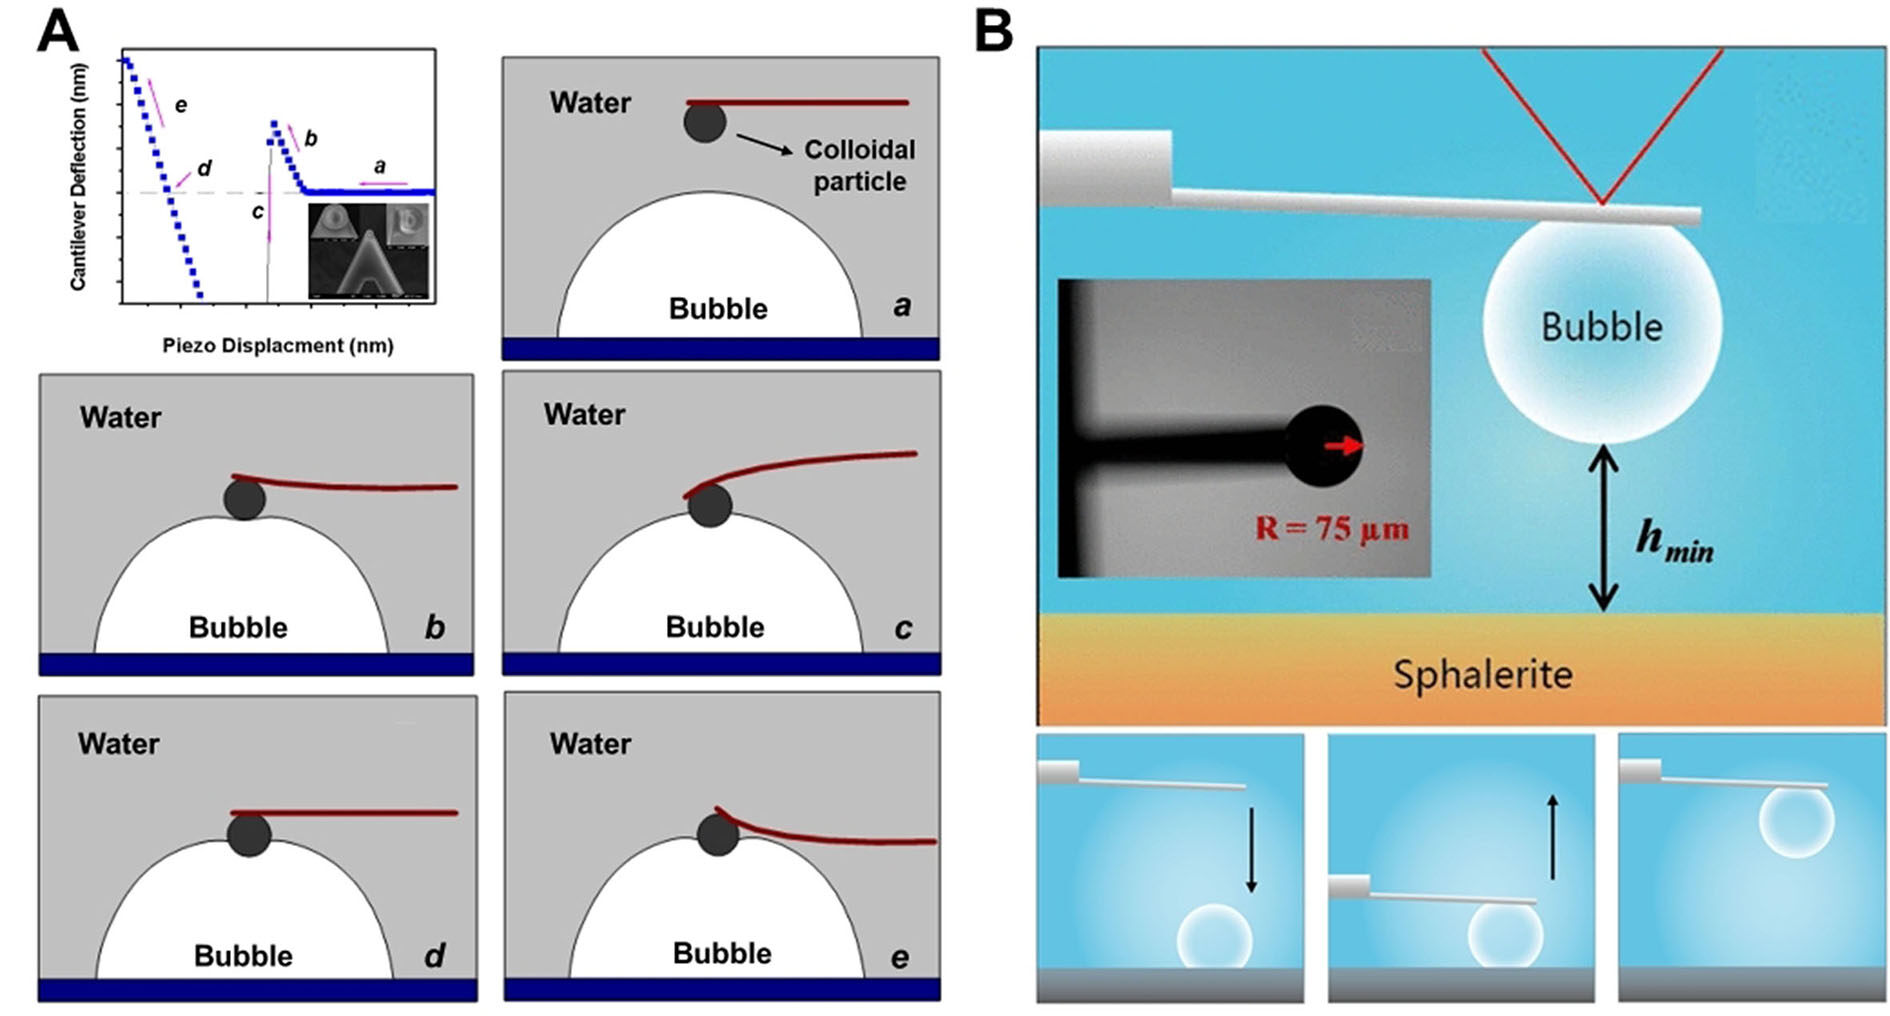 Overview of interfacial interaction mechanisms of bubble-mineral systems at the nanoscale